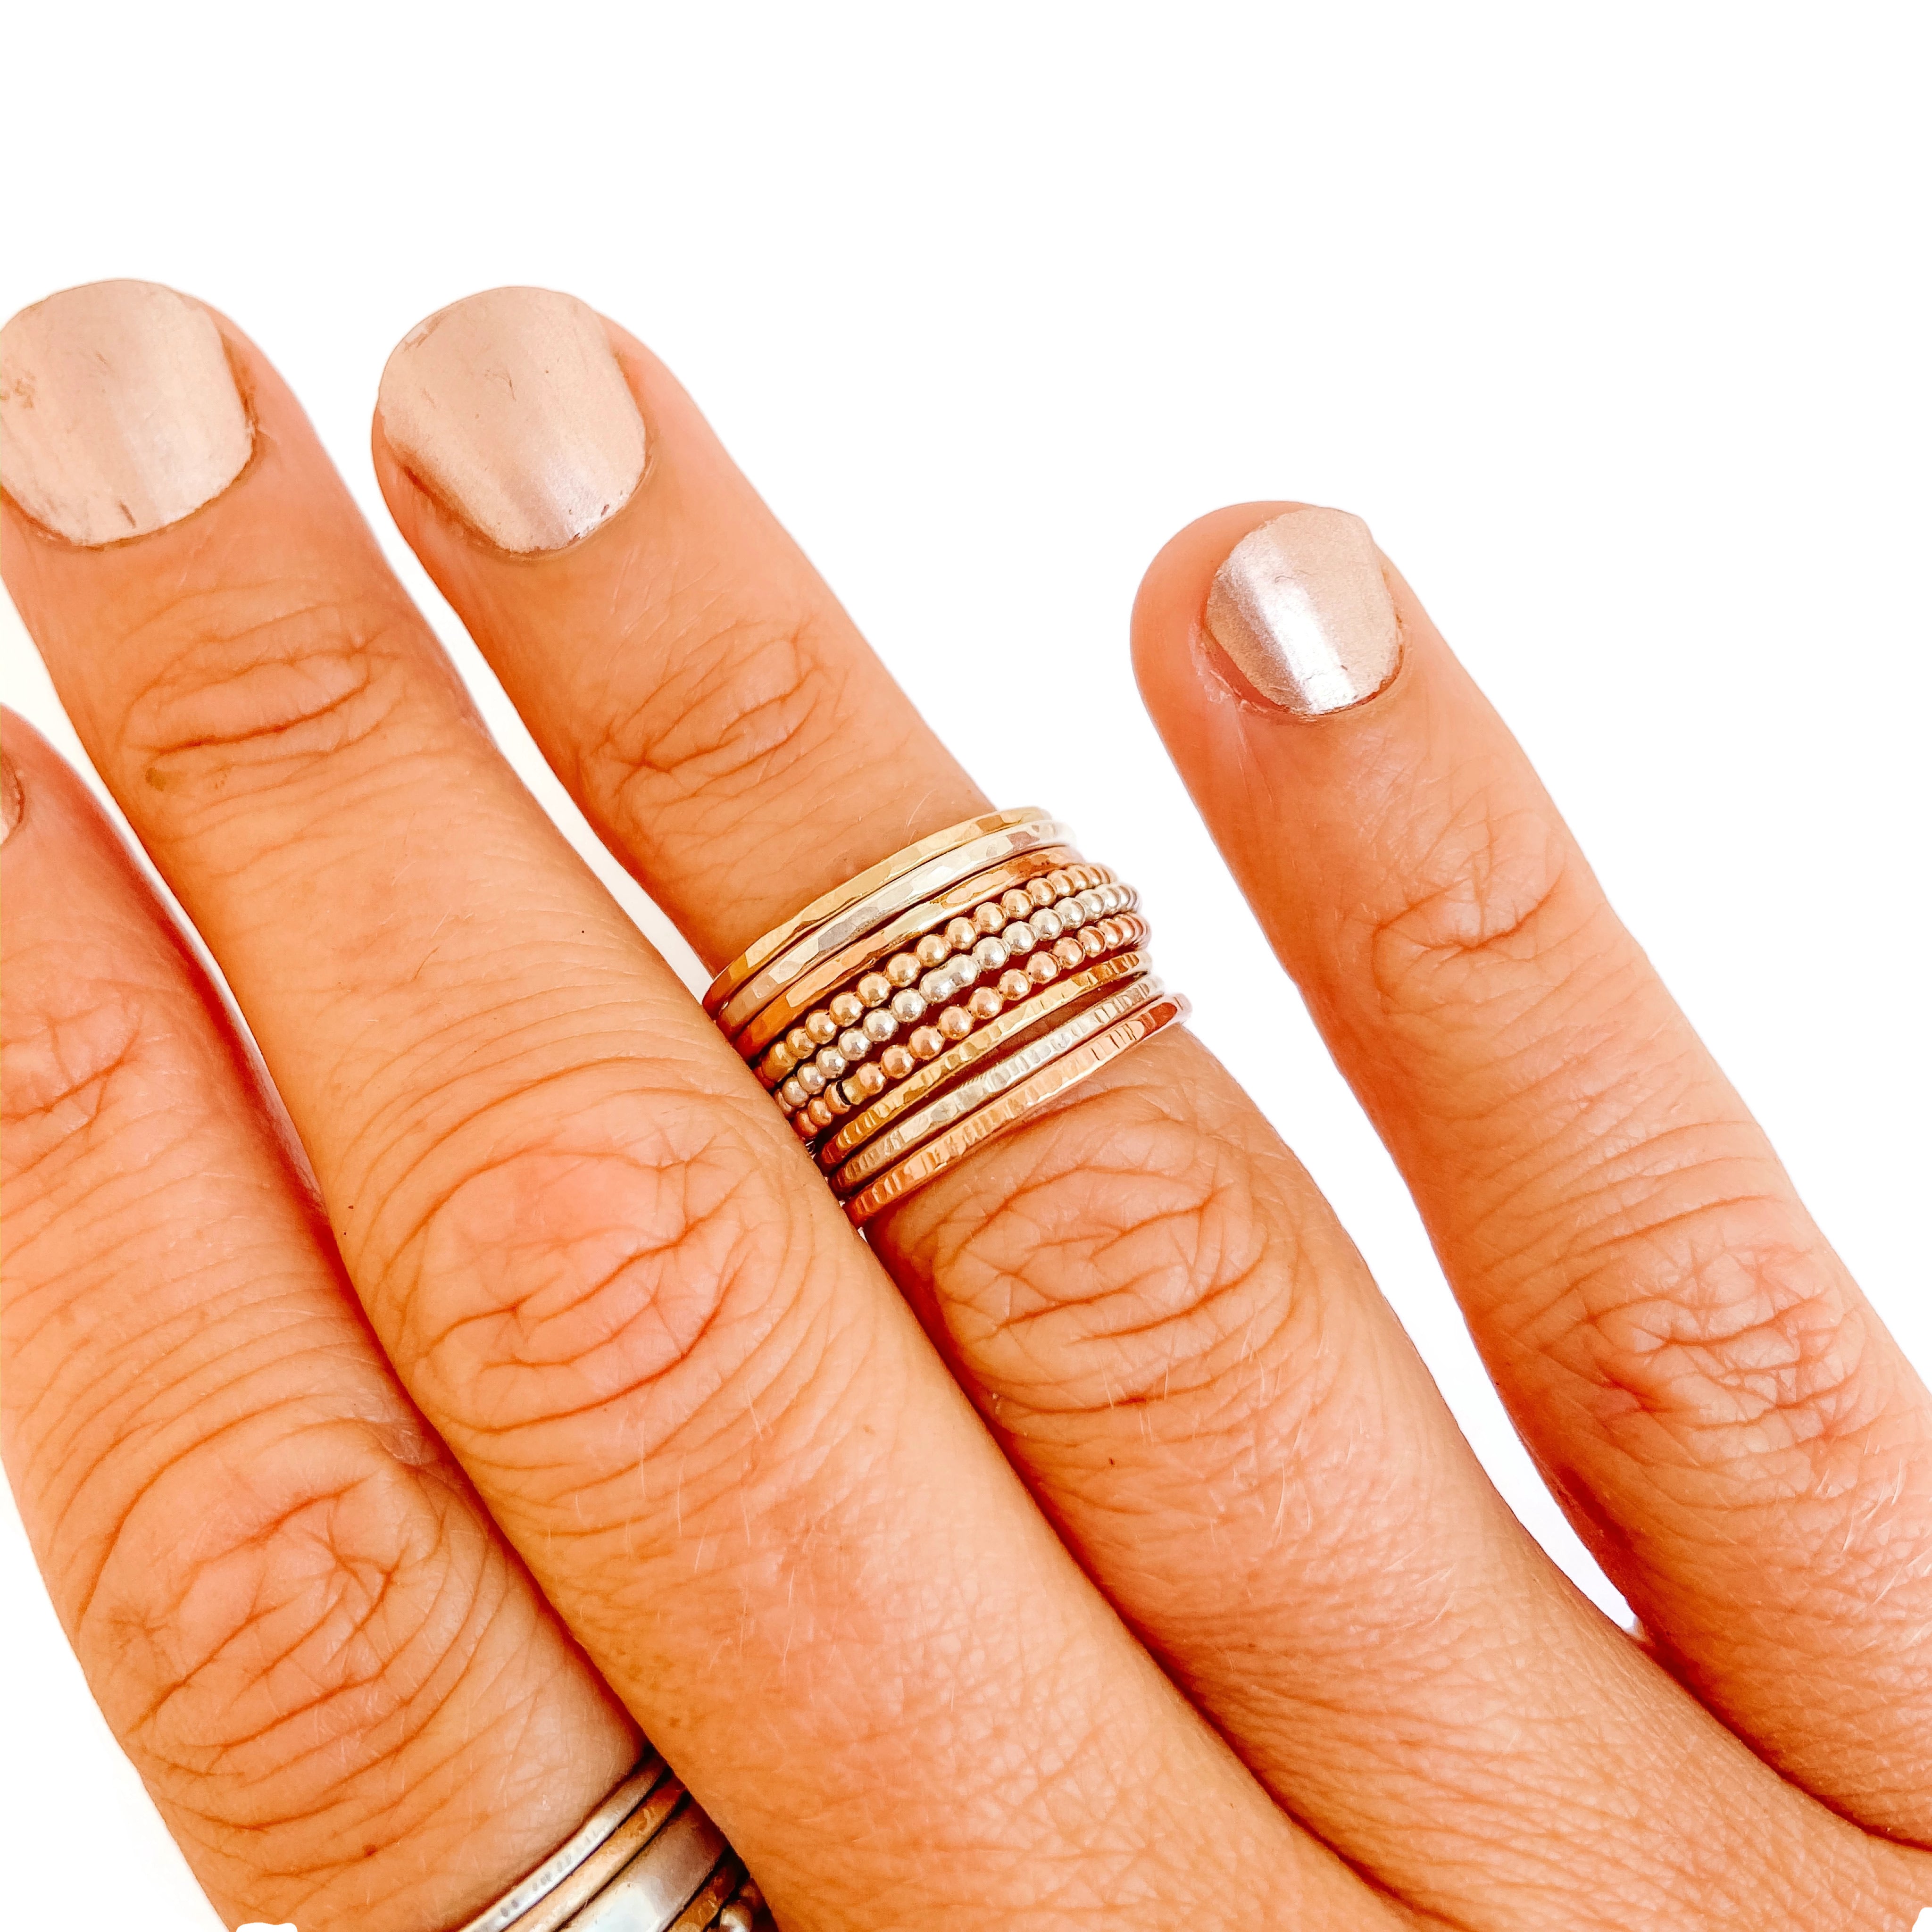 Stacking Rings - Your Choice of 3